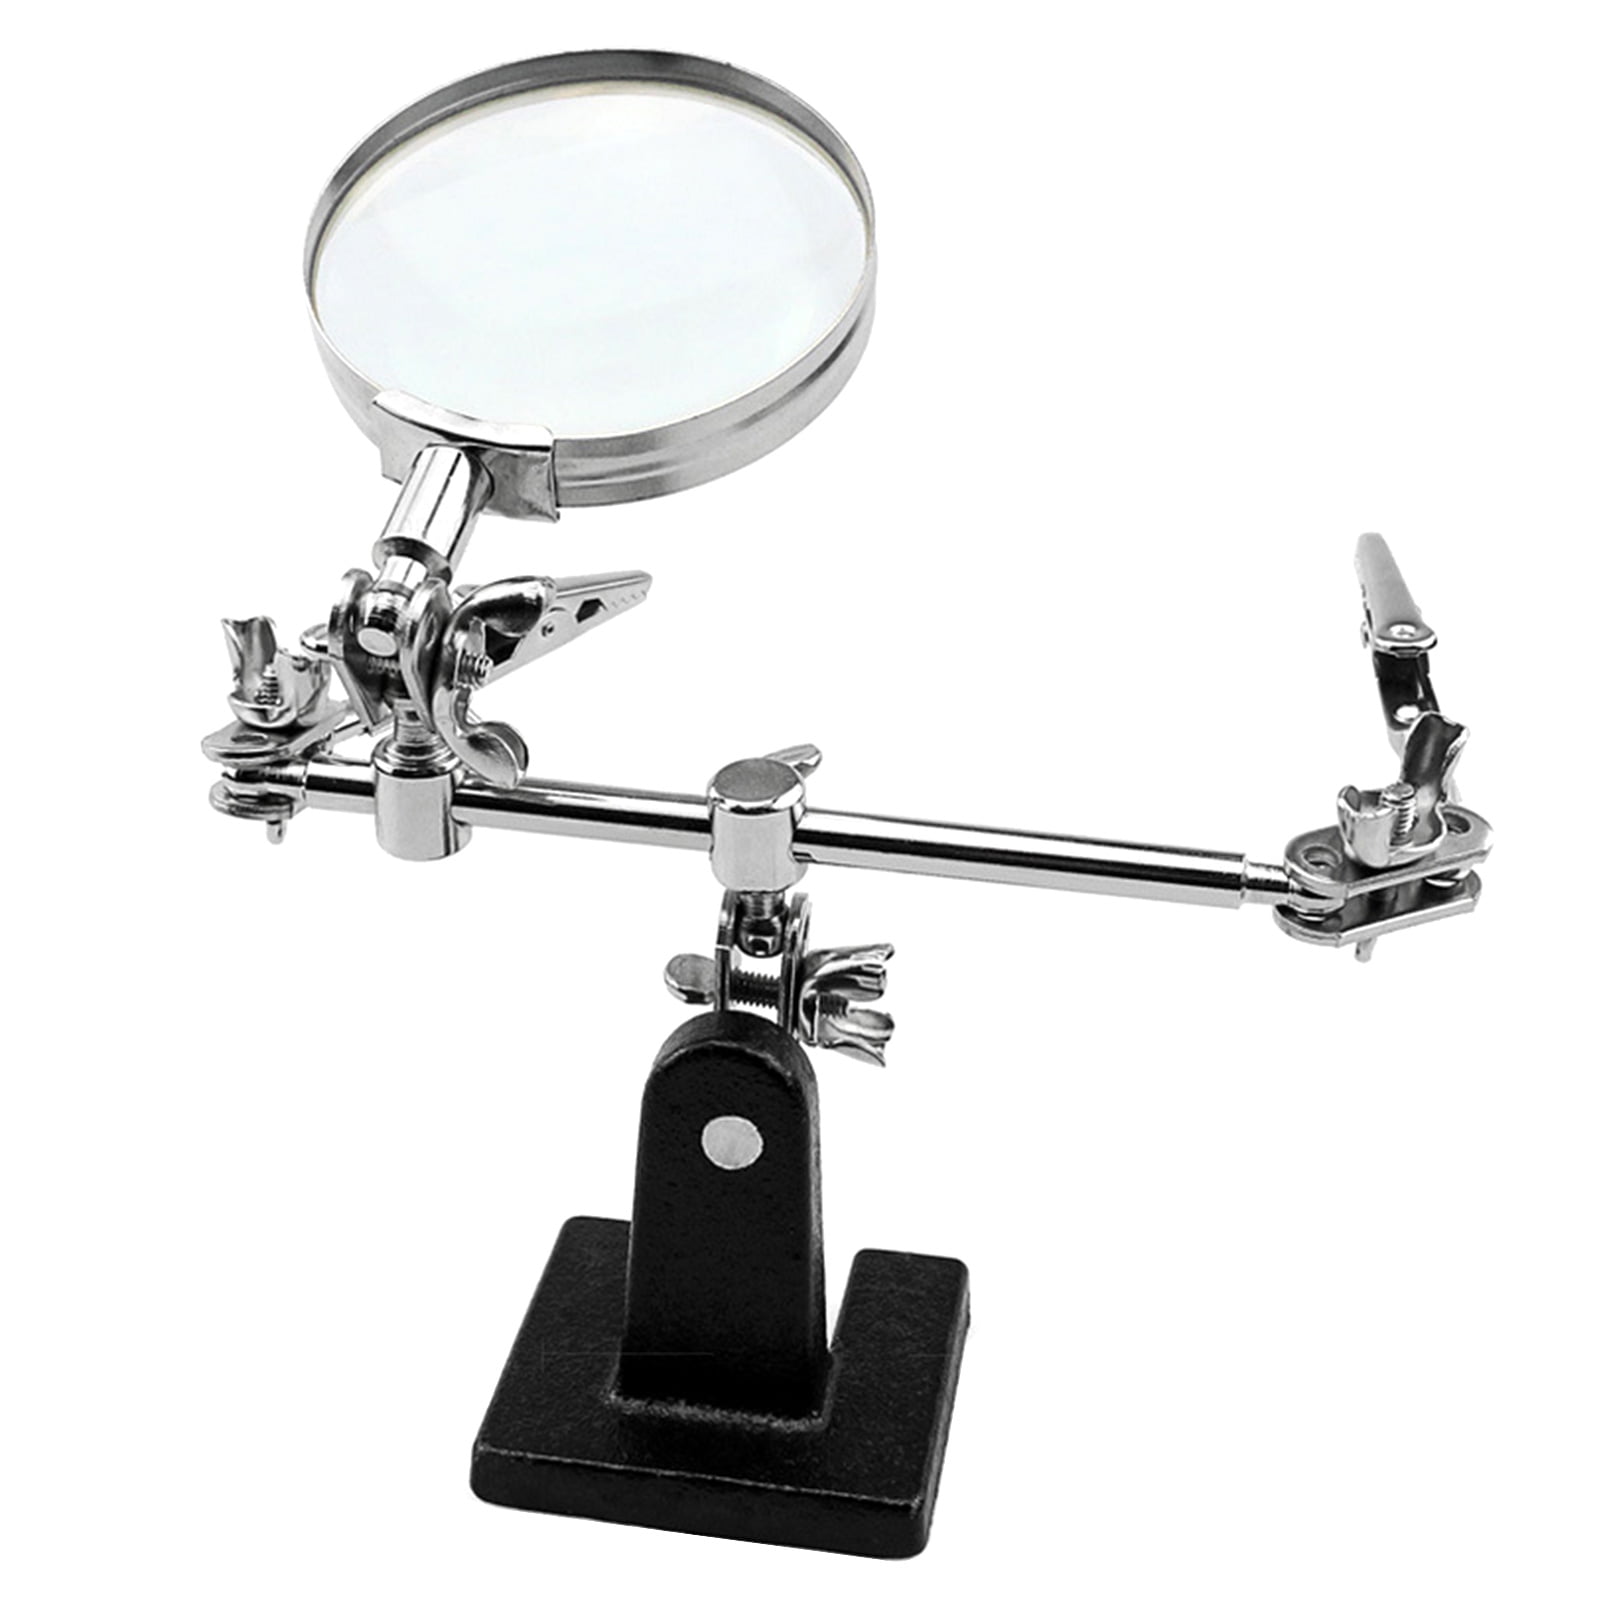 Double Third Hand with Magnifier Hands Free Work Holder Vise Clamp 